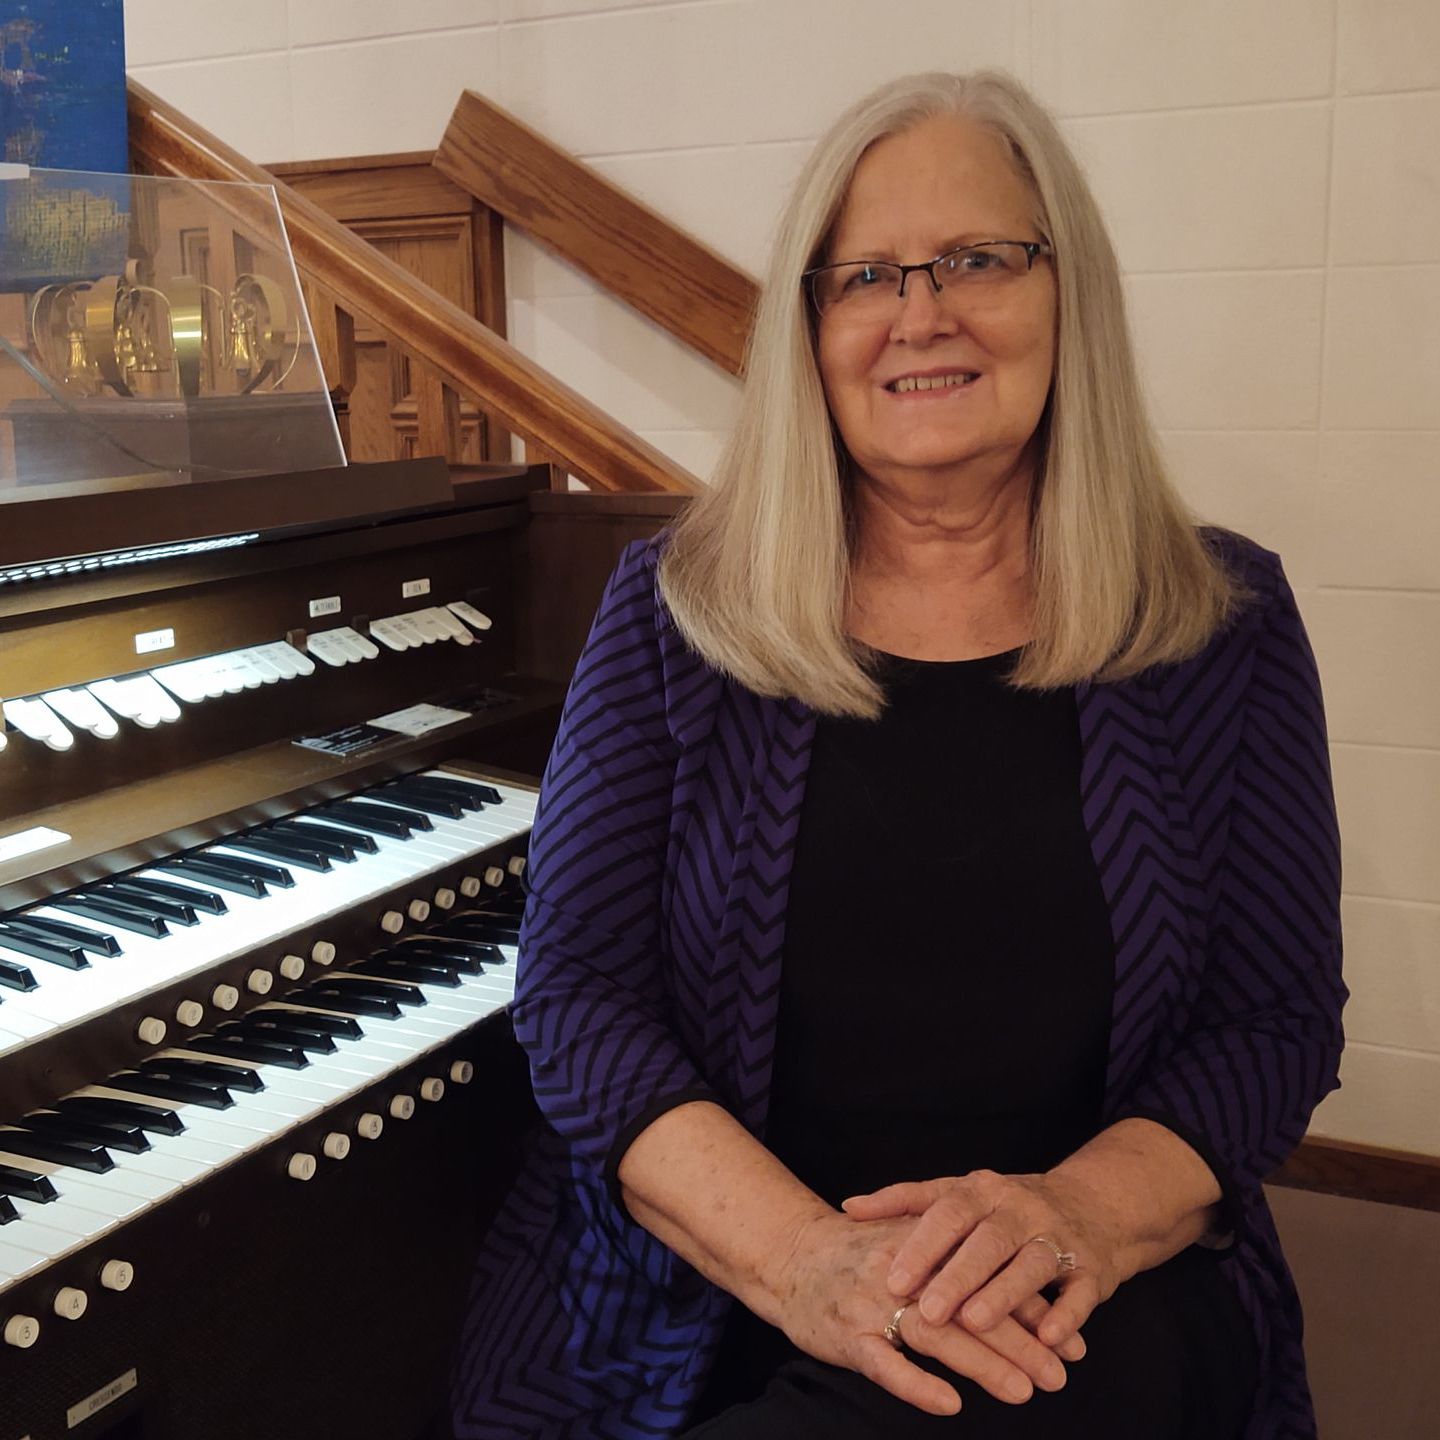 a woman is sitting in front of an organ and smiling